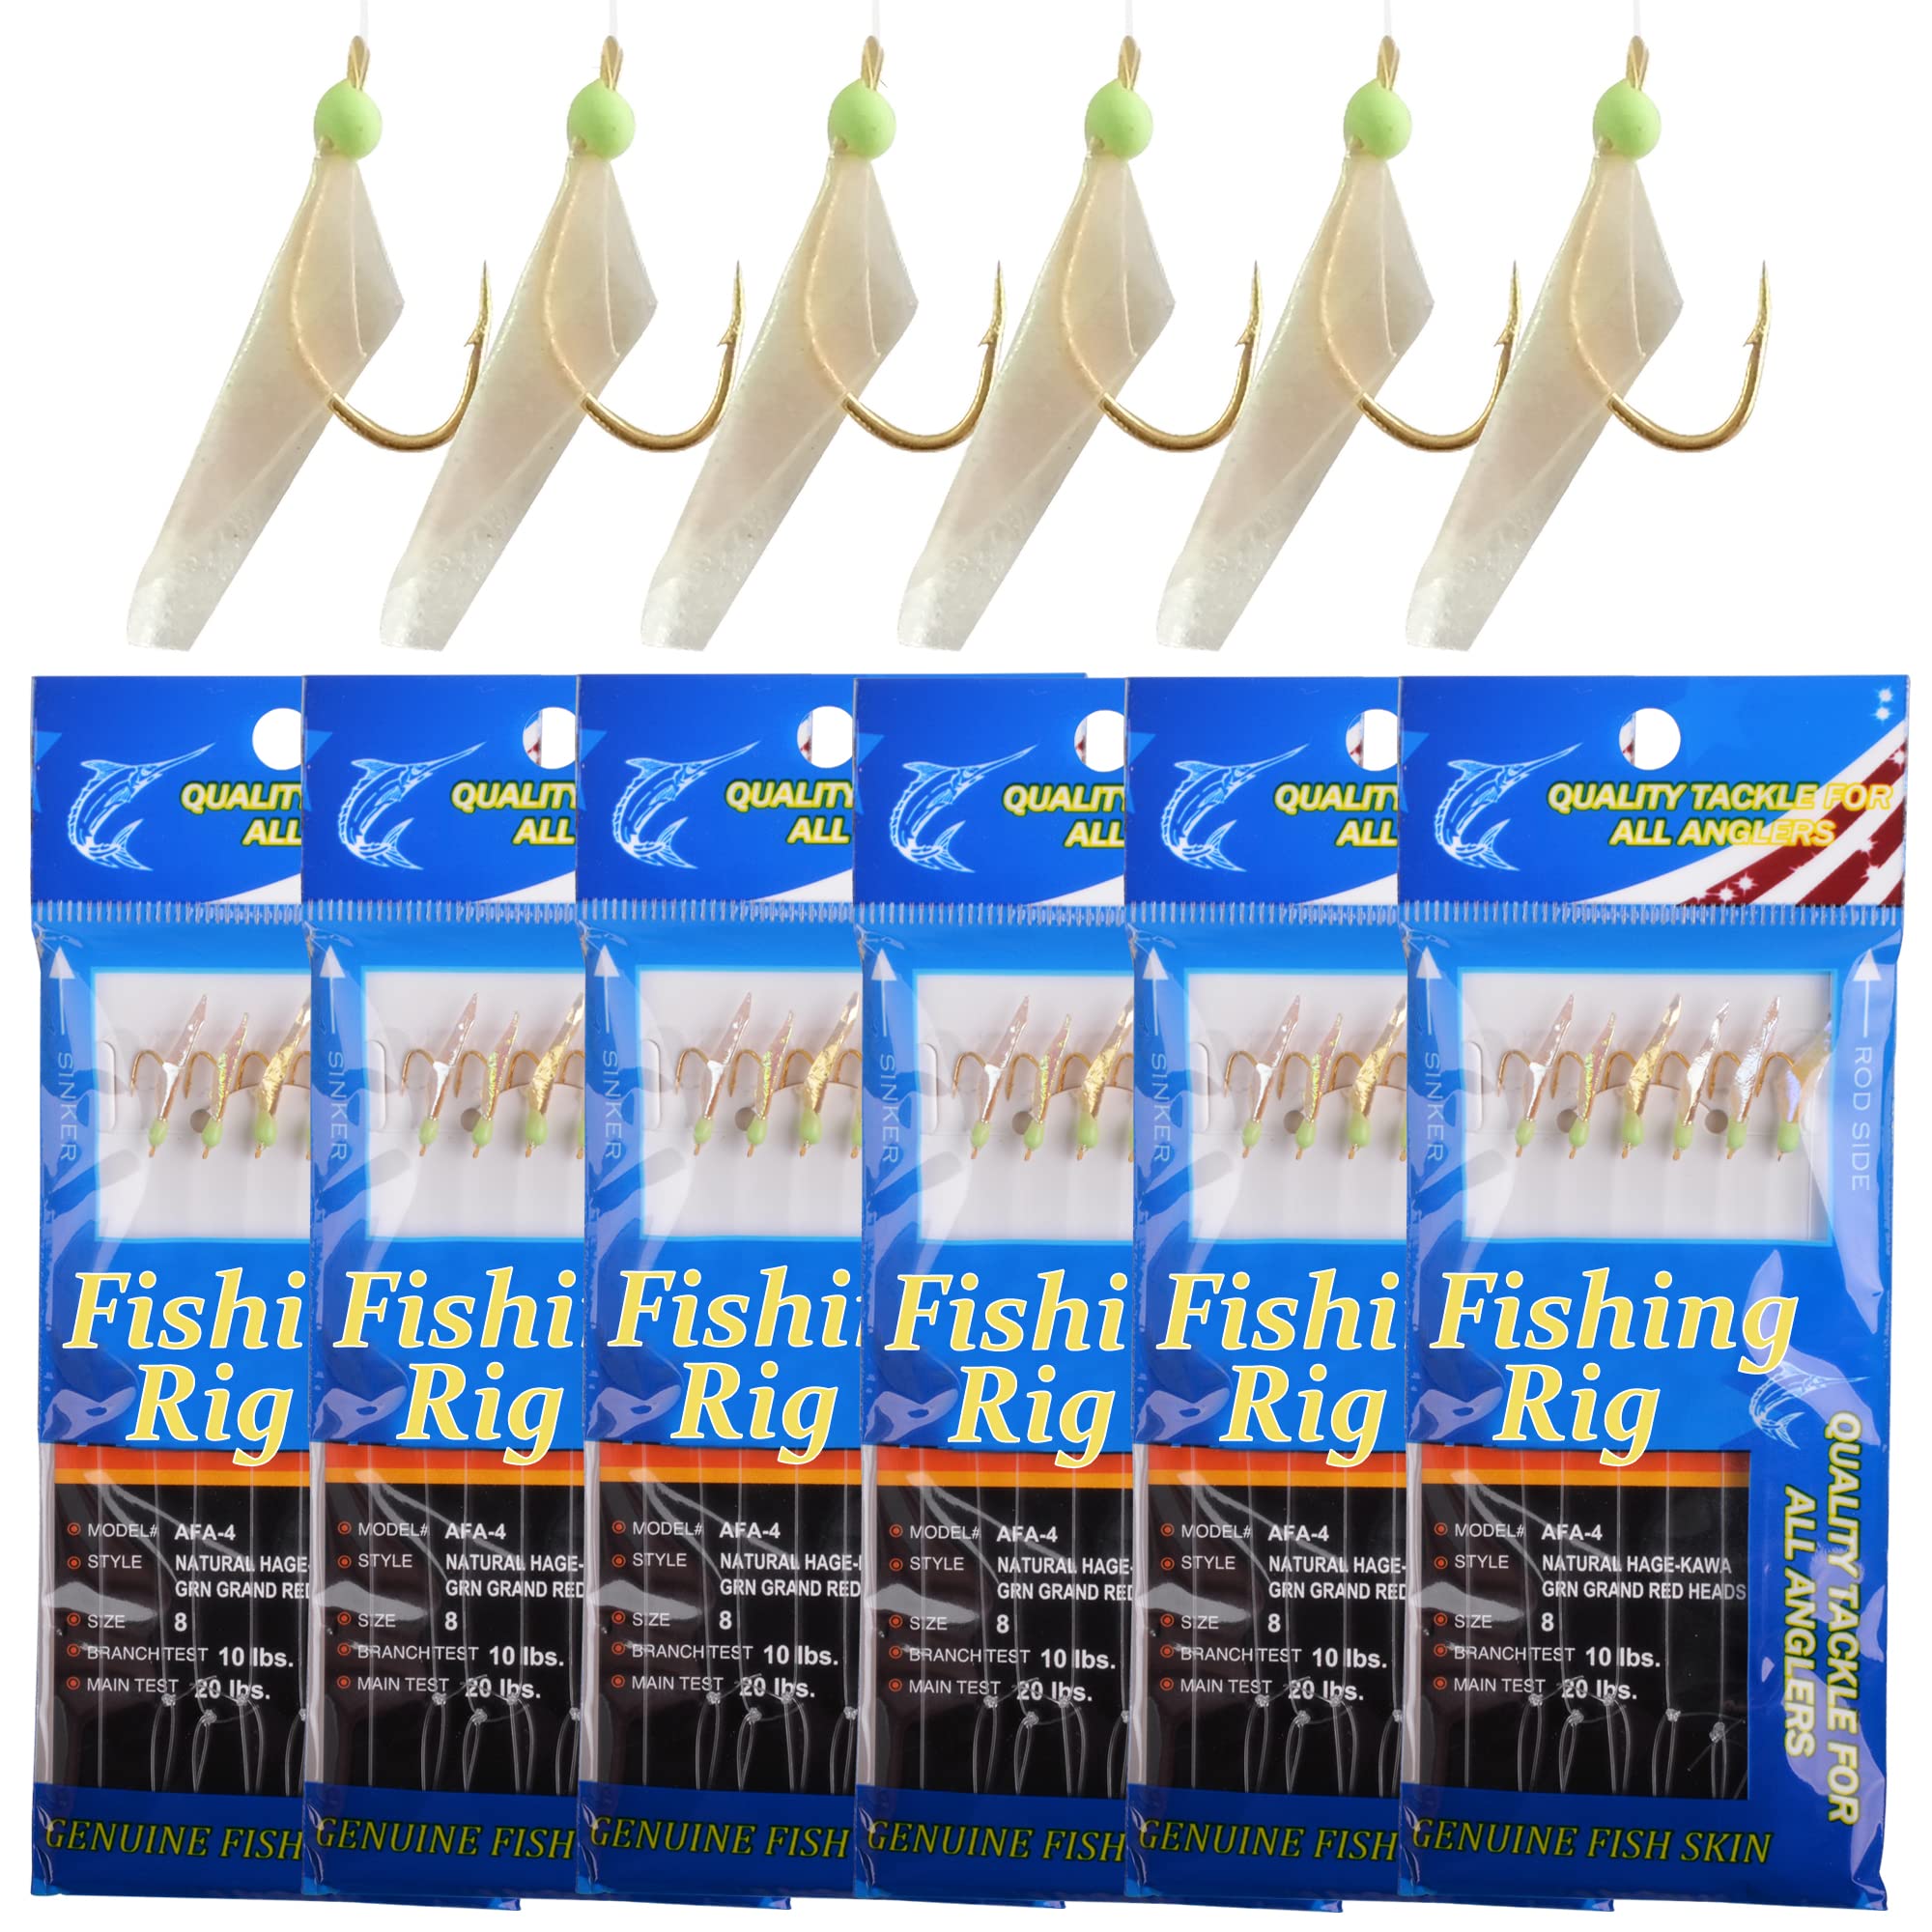 Fishing Rigs Saltwater Bait Lures 6 Packs Fishing Bait Rigs with Fish Skin  High Carbon Steel